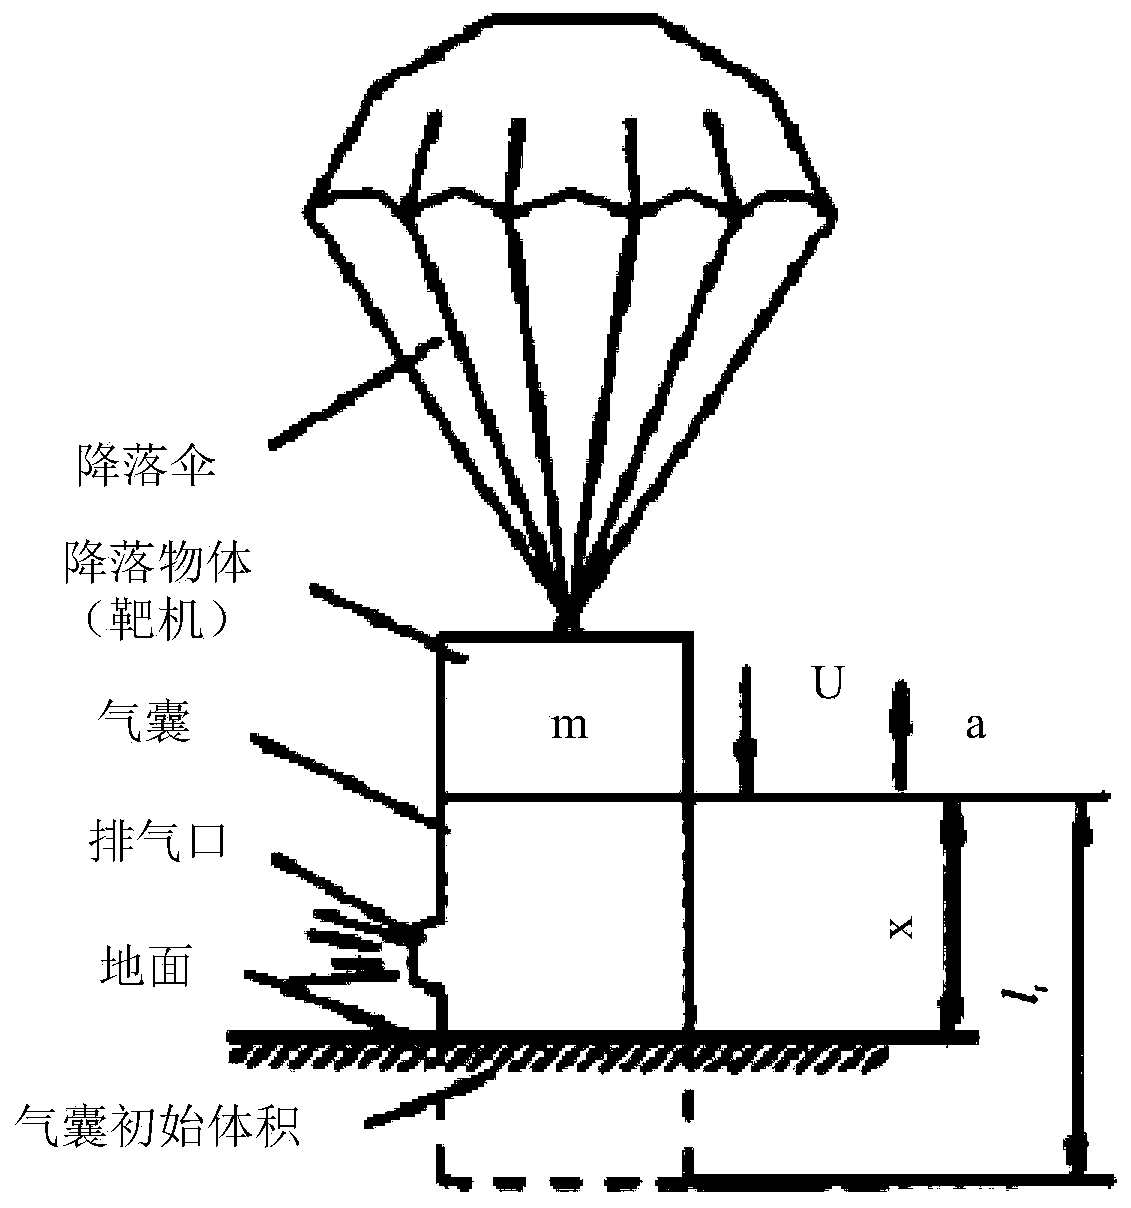 Unmanned-aerial-vehicle shock absorption gasbag and unmanned-aerial-vehicle gasbag shock absorption device